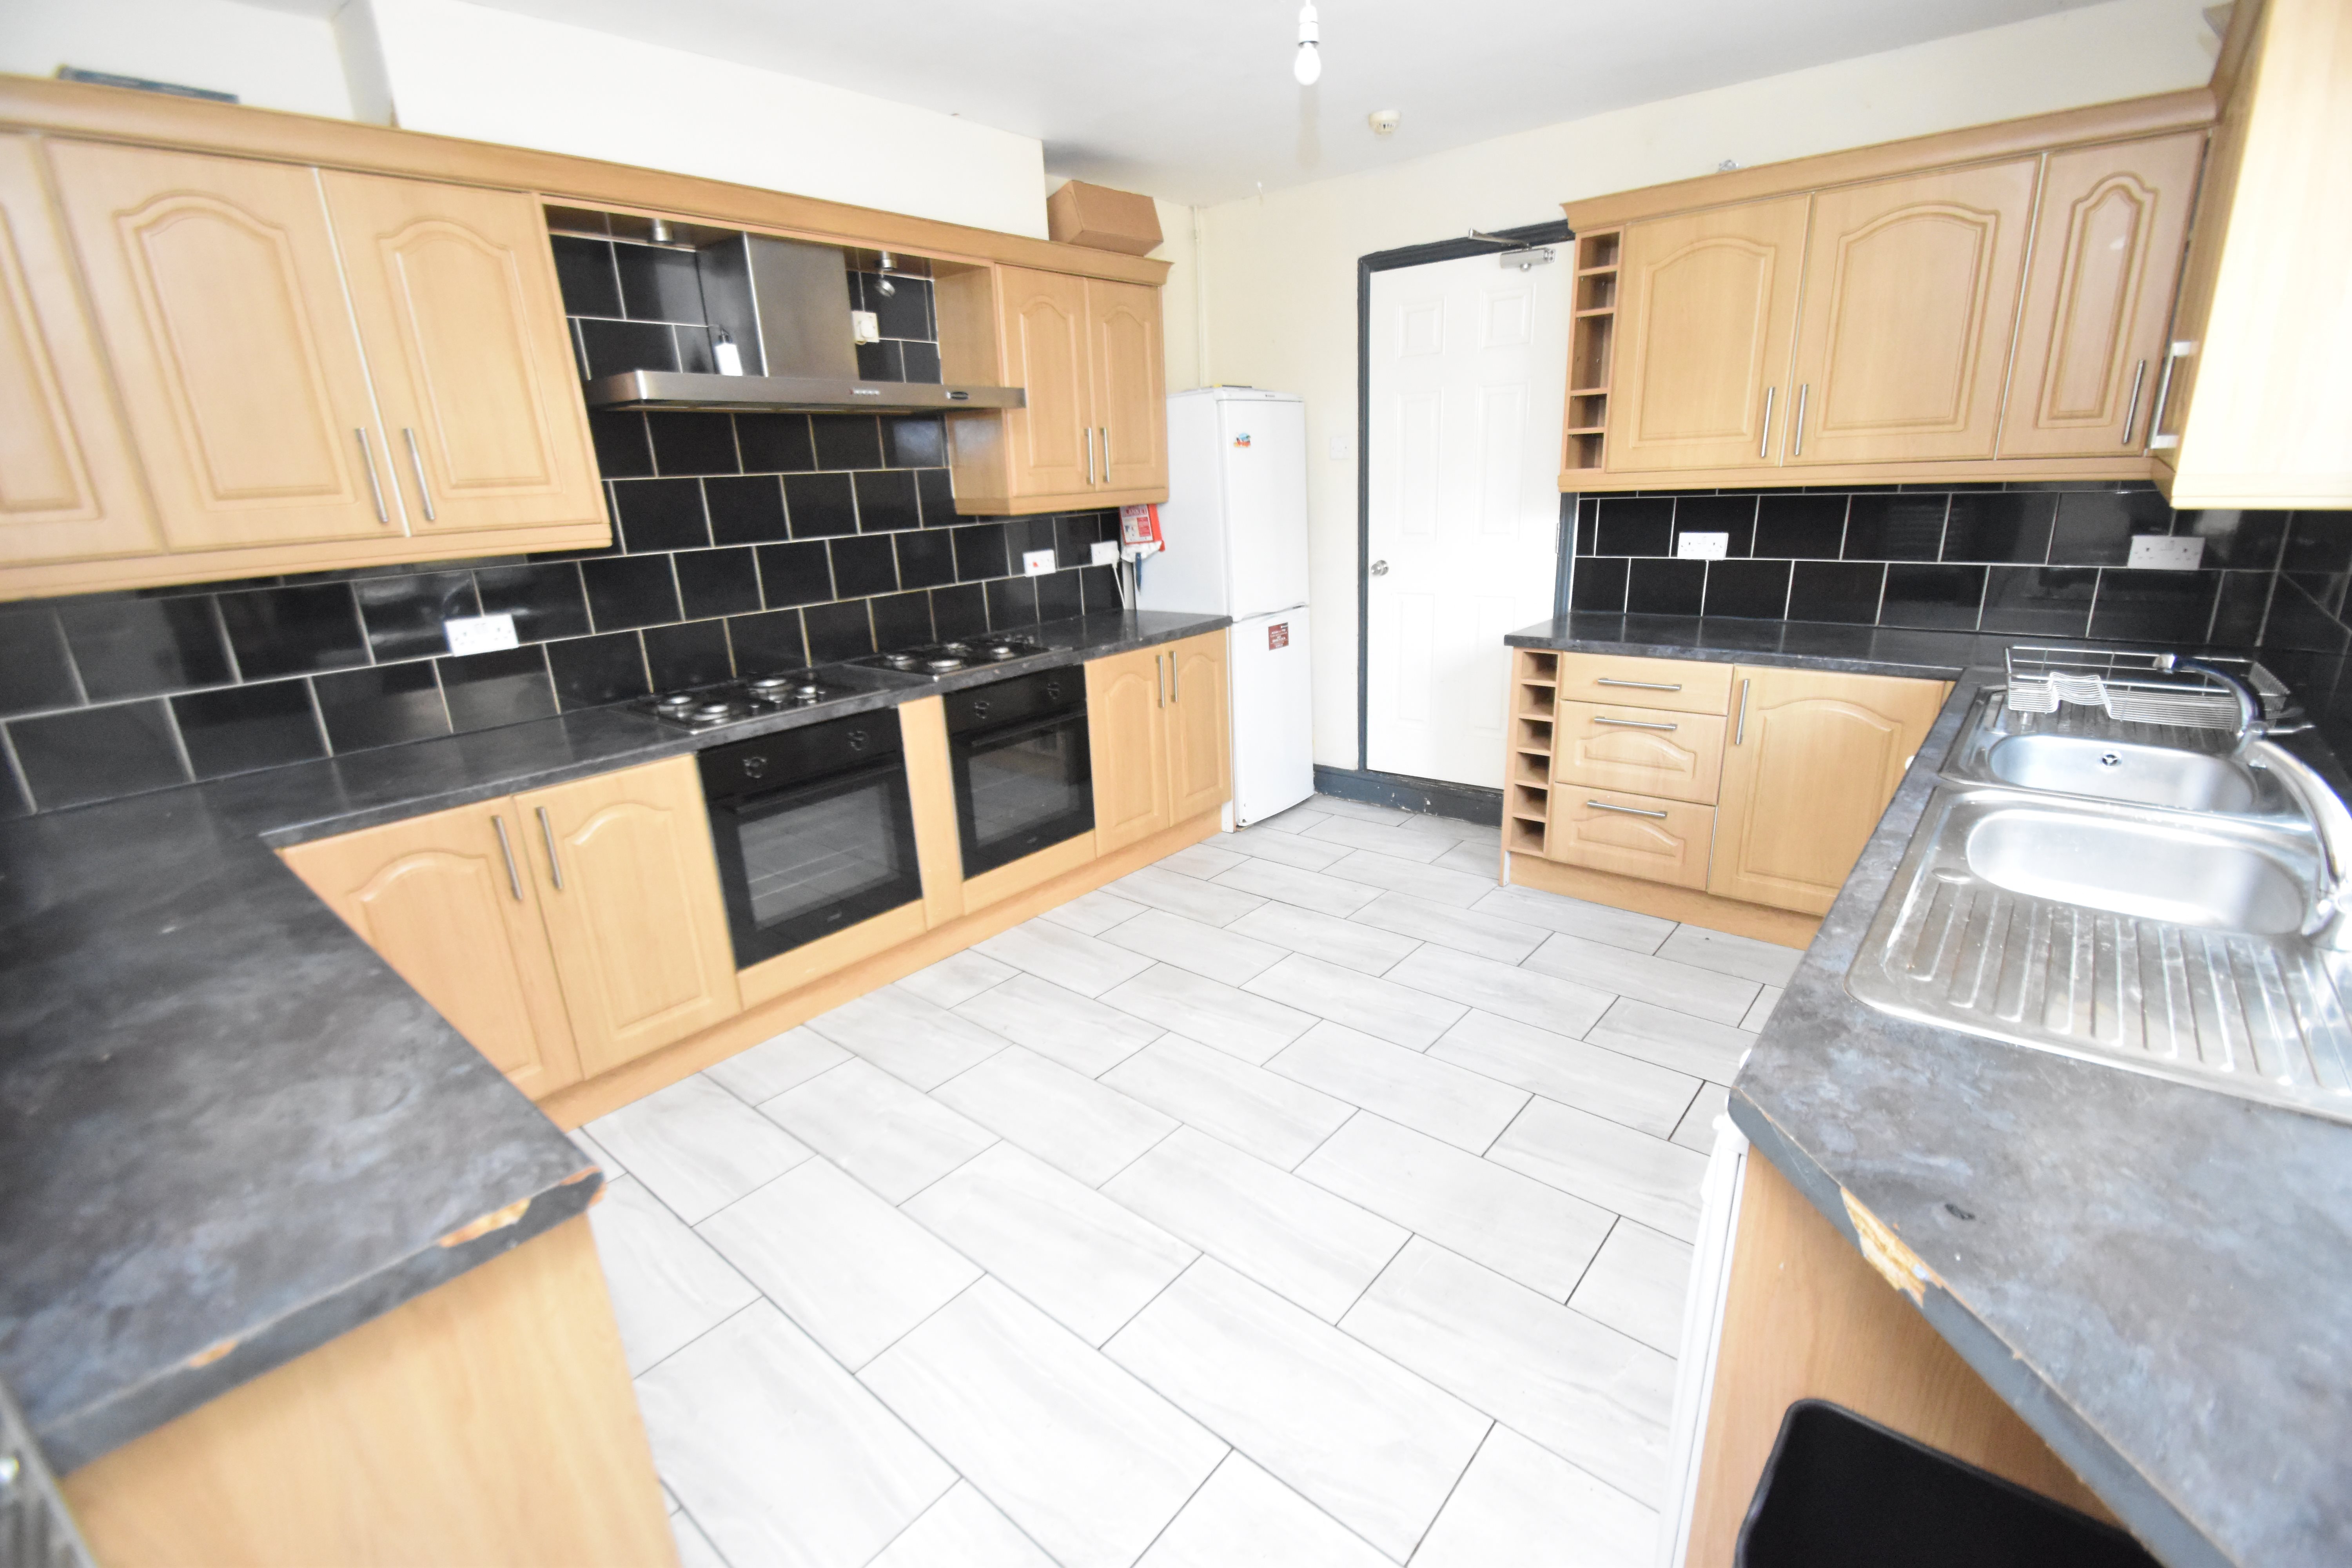 8 bed house to rent in Harriet Street, CATHAYS  - Property Image 2